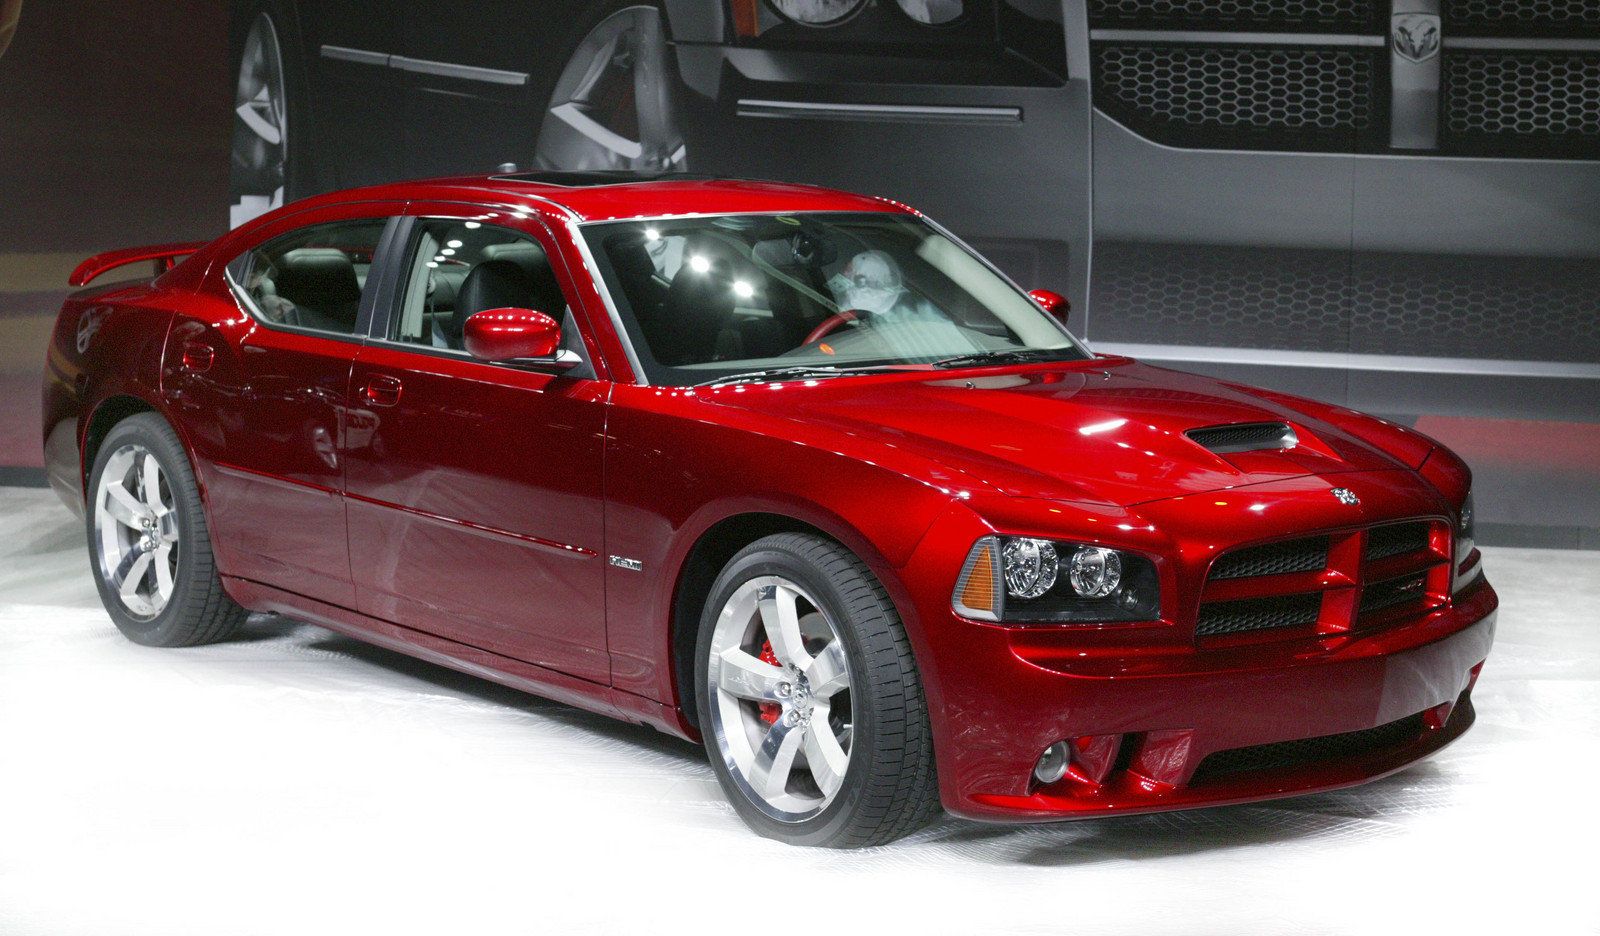 2006 Dodge Charger SXT 0-60 Times, Top Speed, Specs, Quarter Mile, and  Wallpapers - MyCarSpecs United States / USA